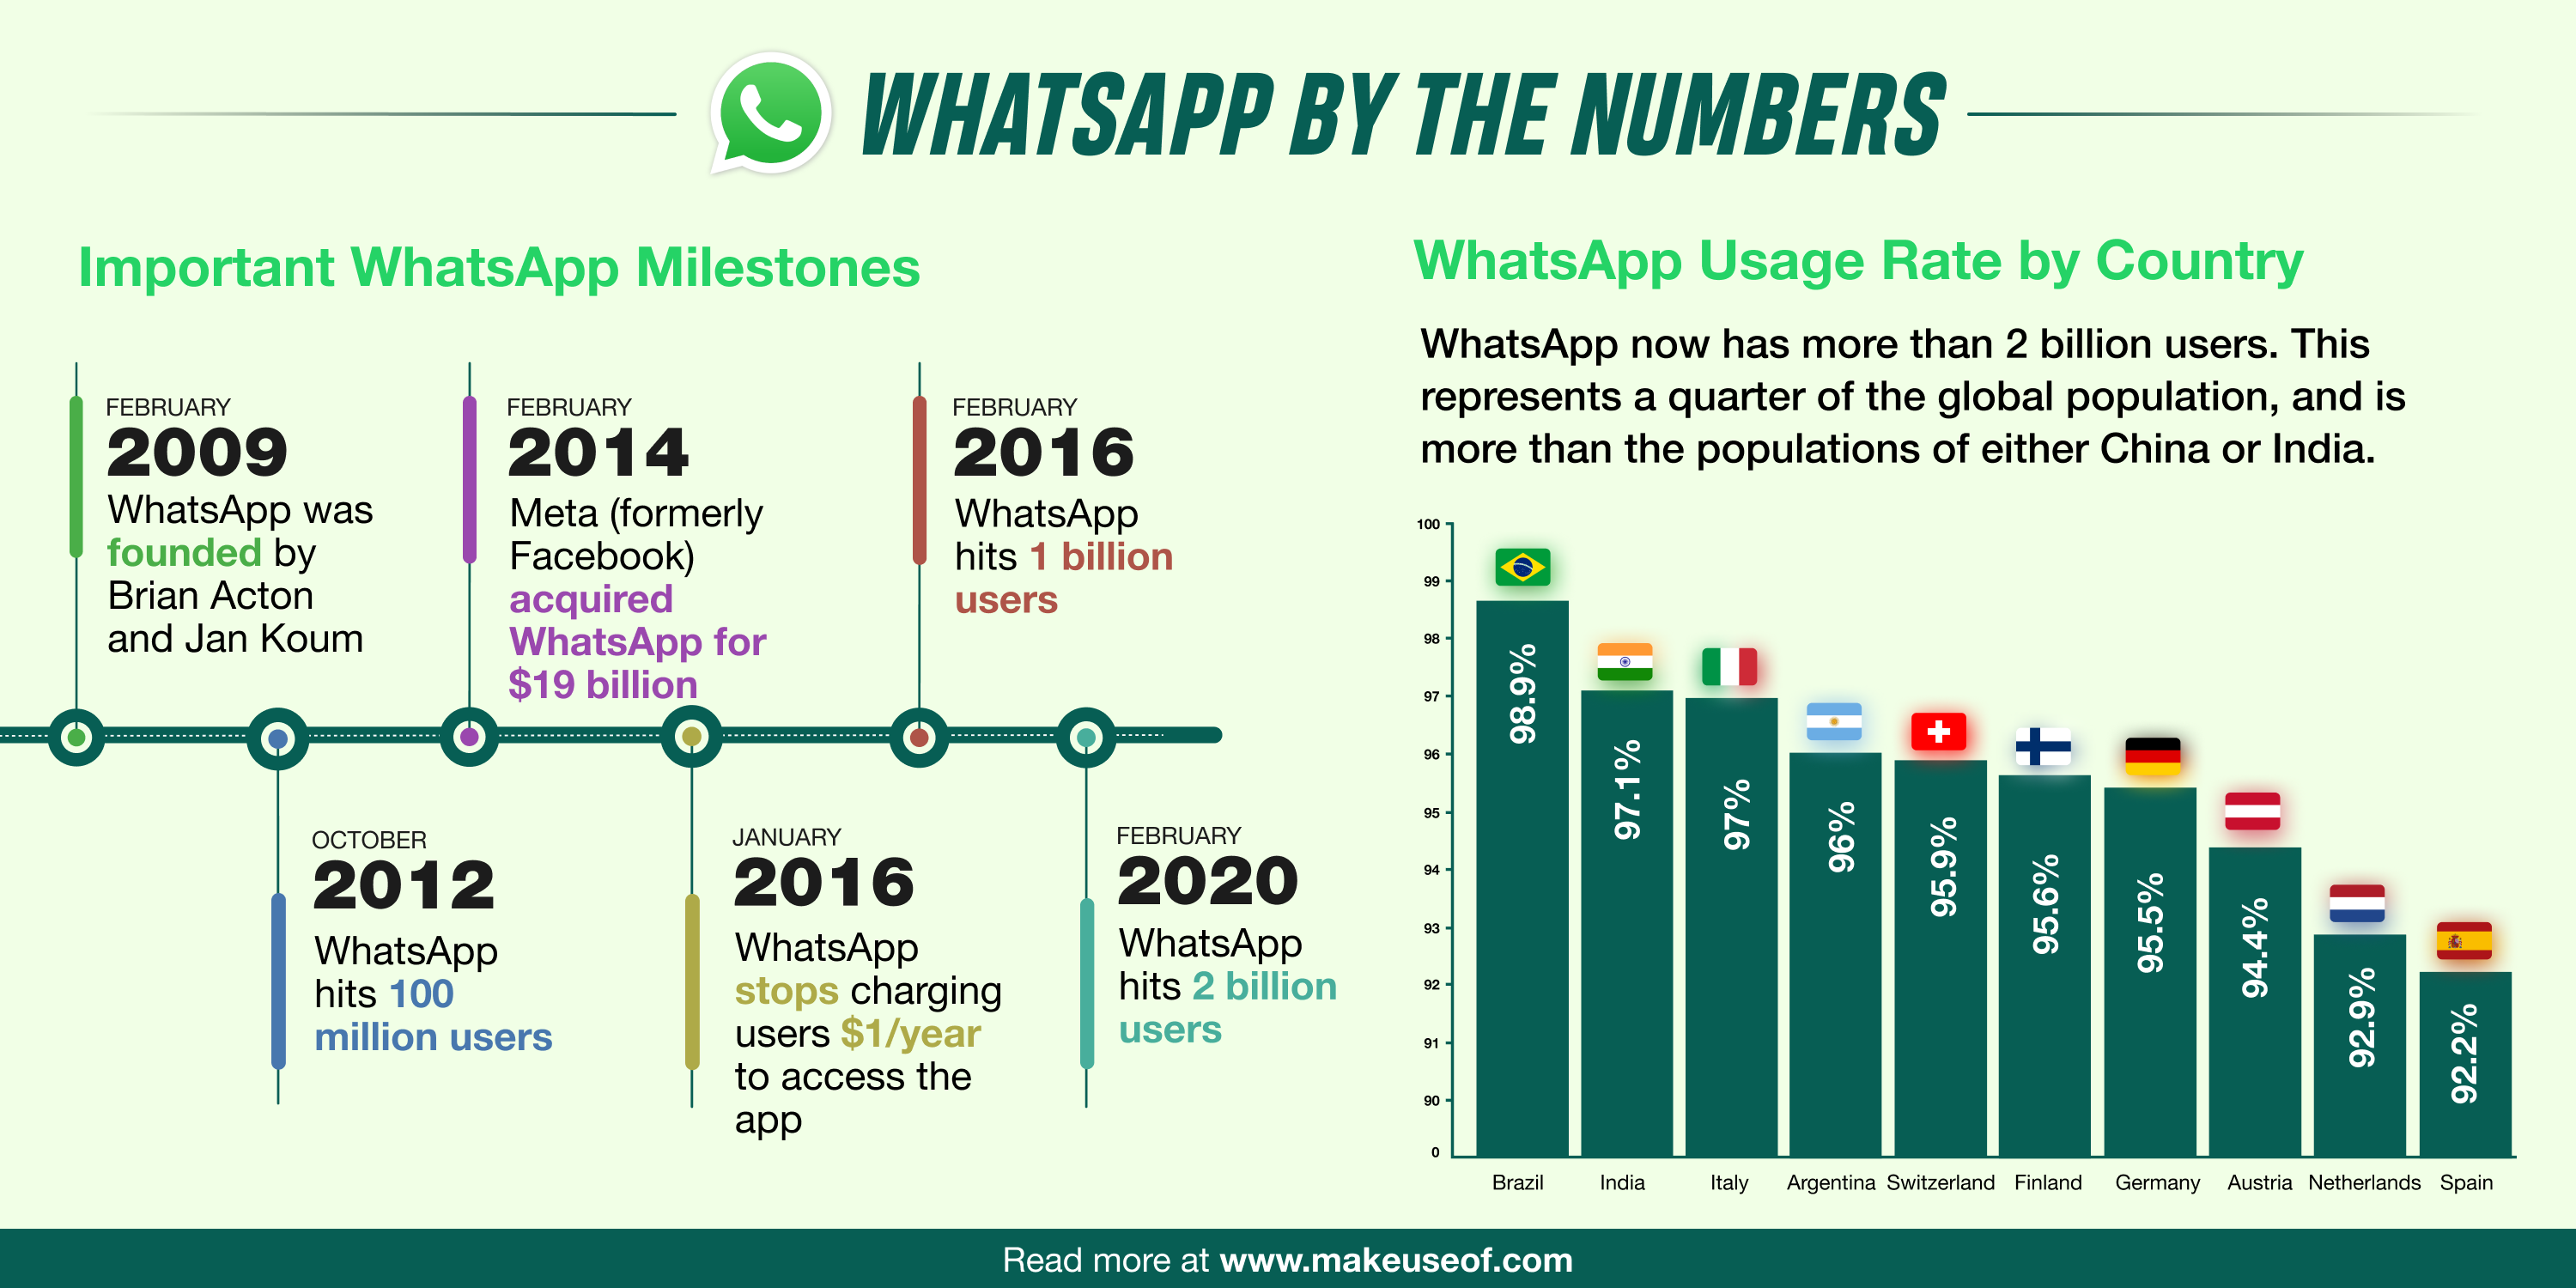 Infographic on WhatsApp by the numbers